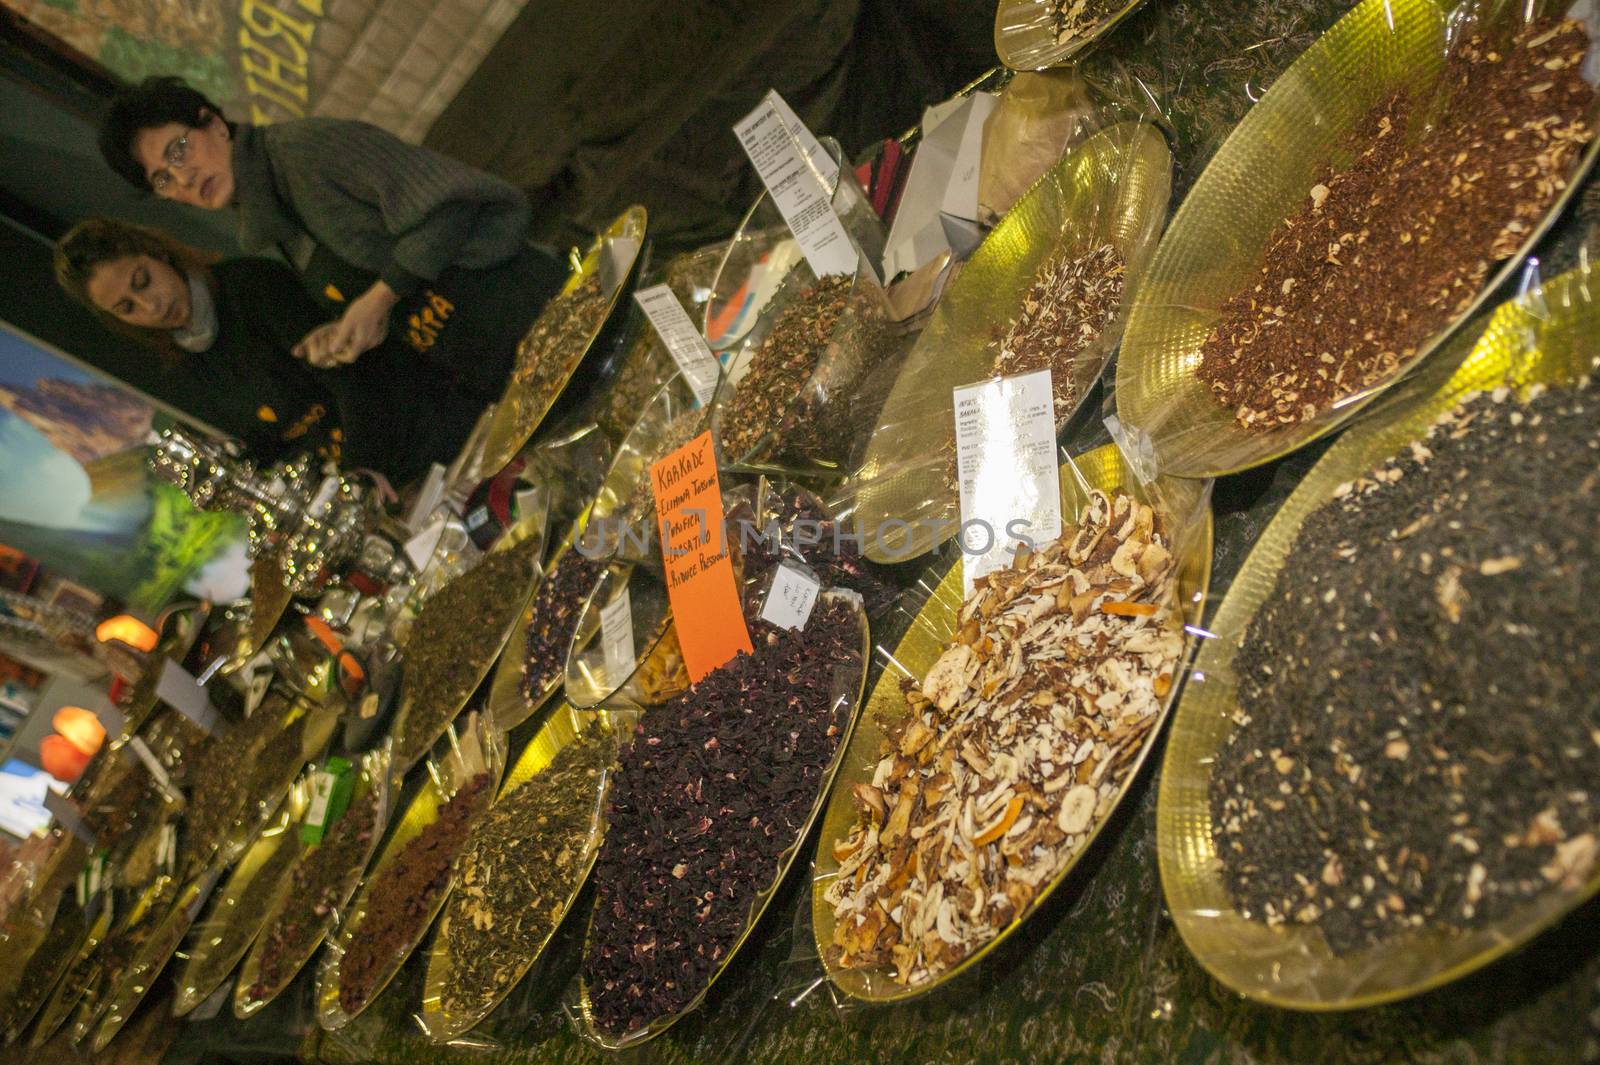 Spice shop at a street market by pippocarlot